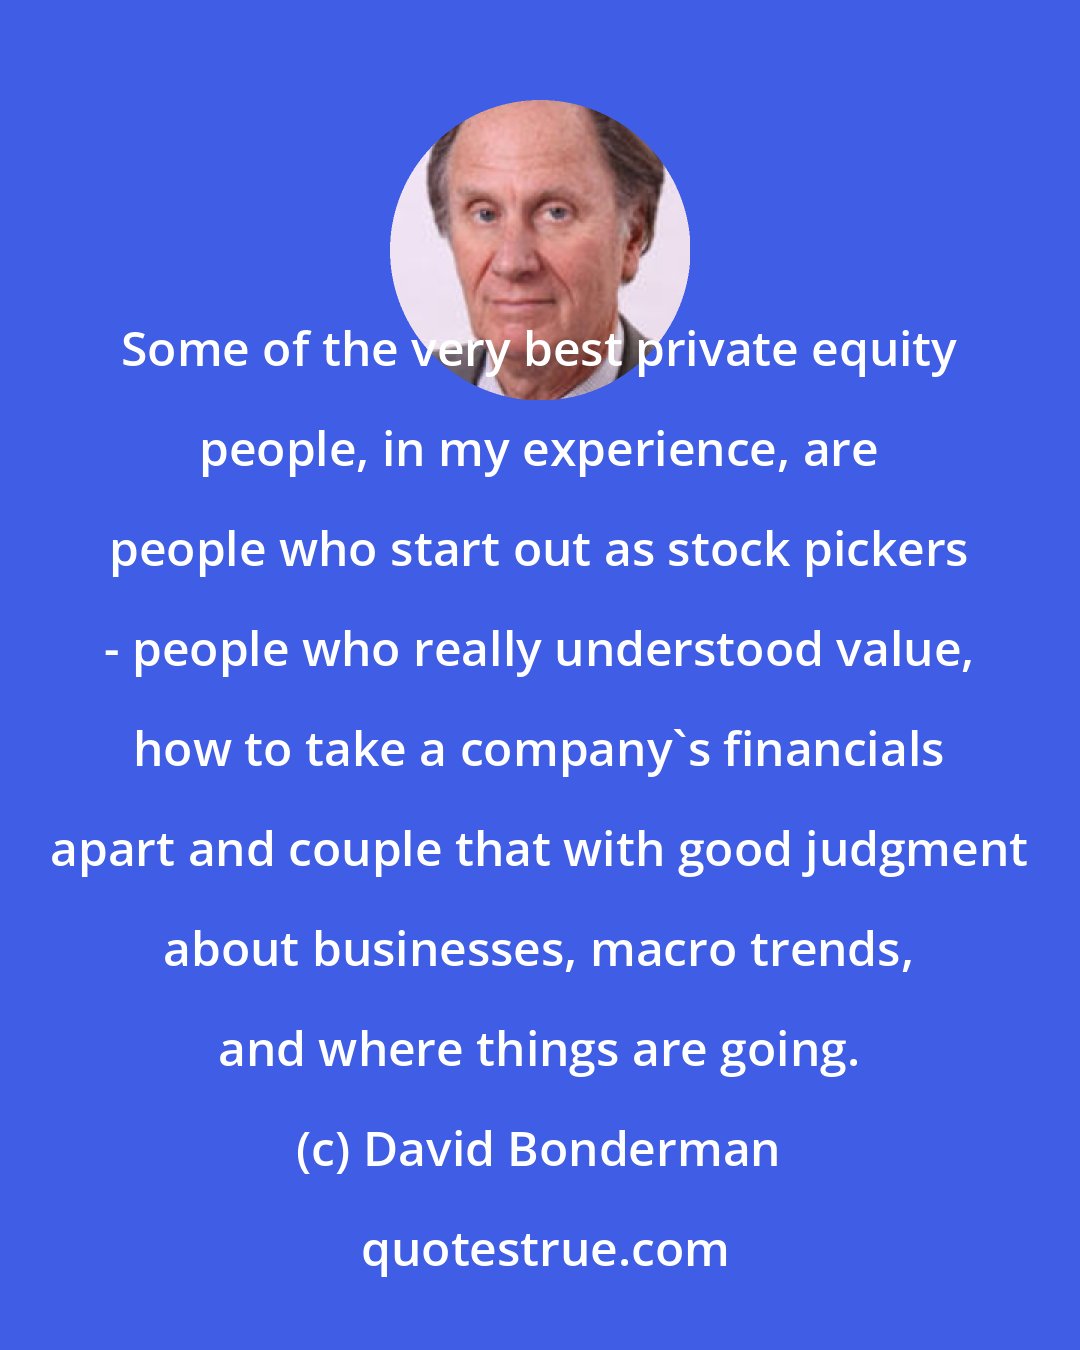 David Bonderman: Some of the very best private equity people, in my experience, are people who start out as stock pickers - people who really understood value, how to take a company's financials apart and couple that with good judgment about businesses, macro trends, and where things are going.